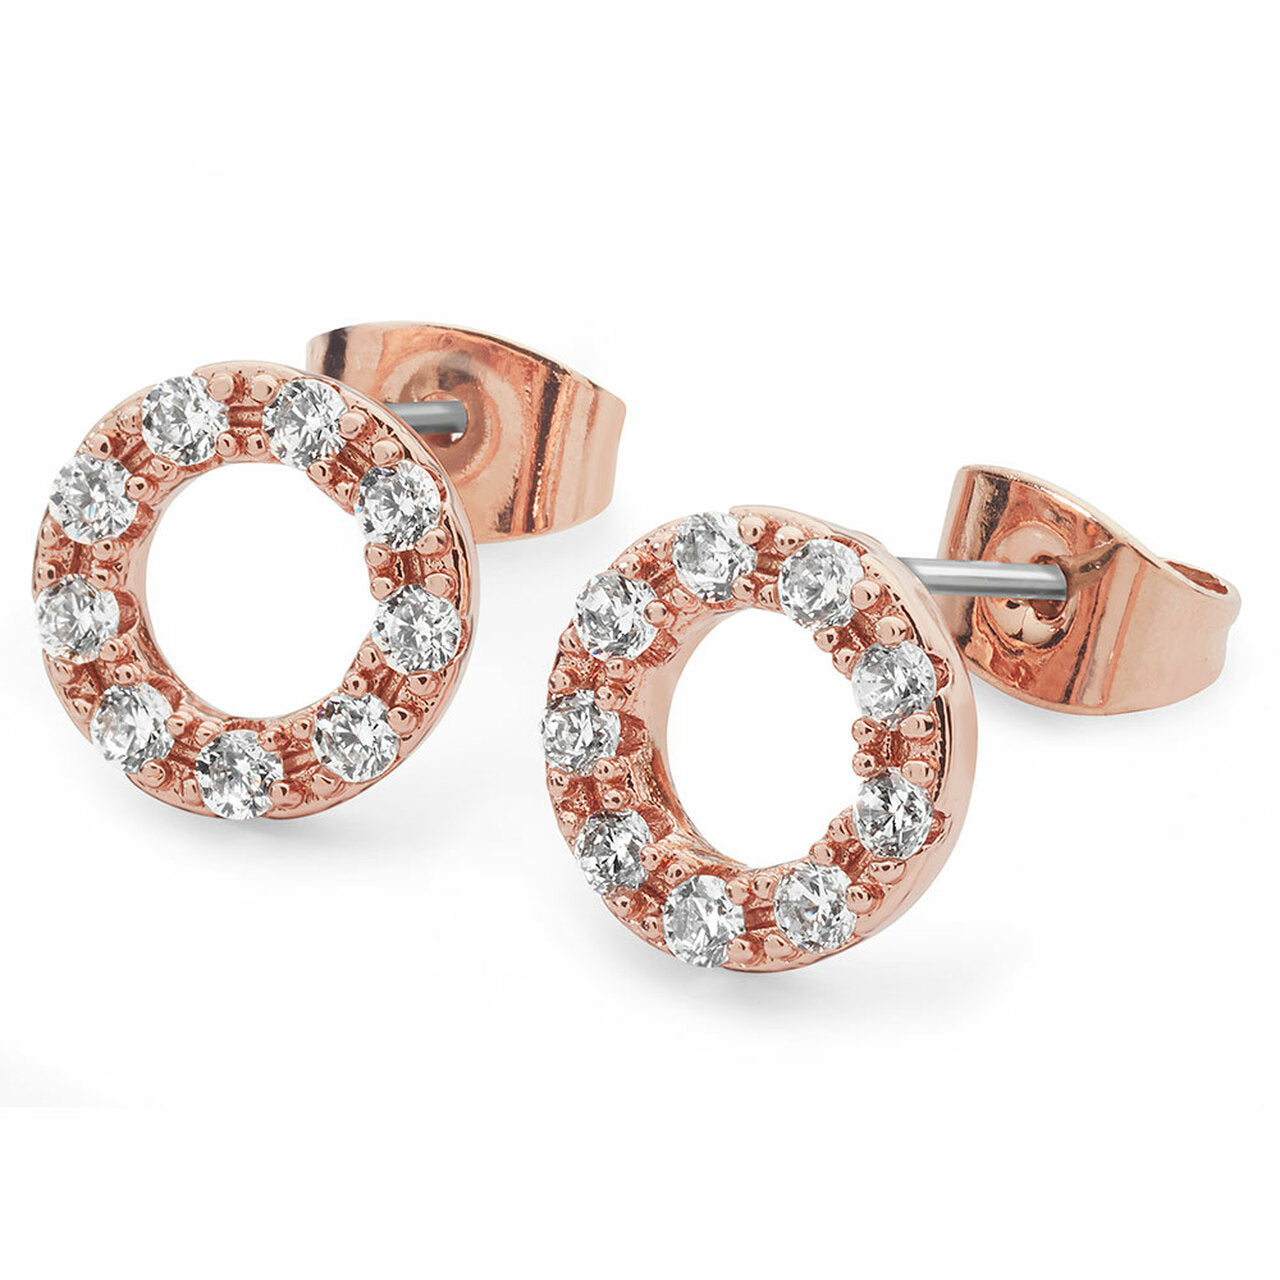 Tipperary Crystal Forever Moon Earrings Rose Gold  These sophisticated clear crystal stud earrings are the perfect accompaniment to the Forever moon pendant. Each rose gold post earring features an open circle fully lined with 24 dazzling clear cut crystals and comfortably secured with push backs.